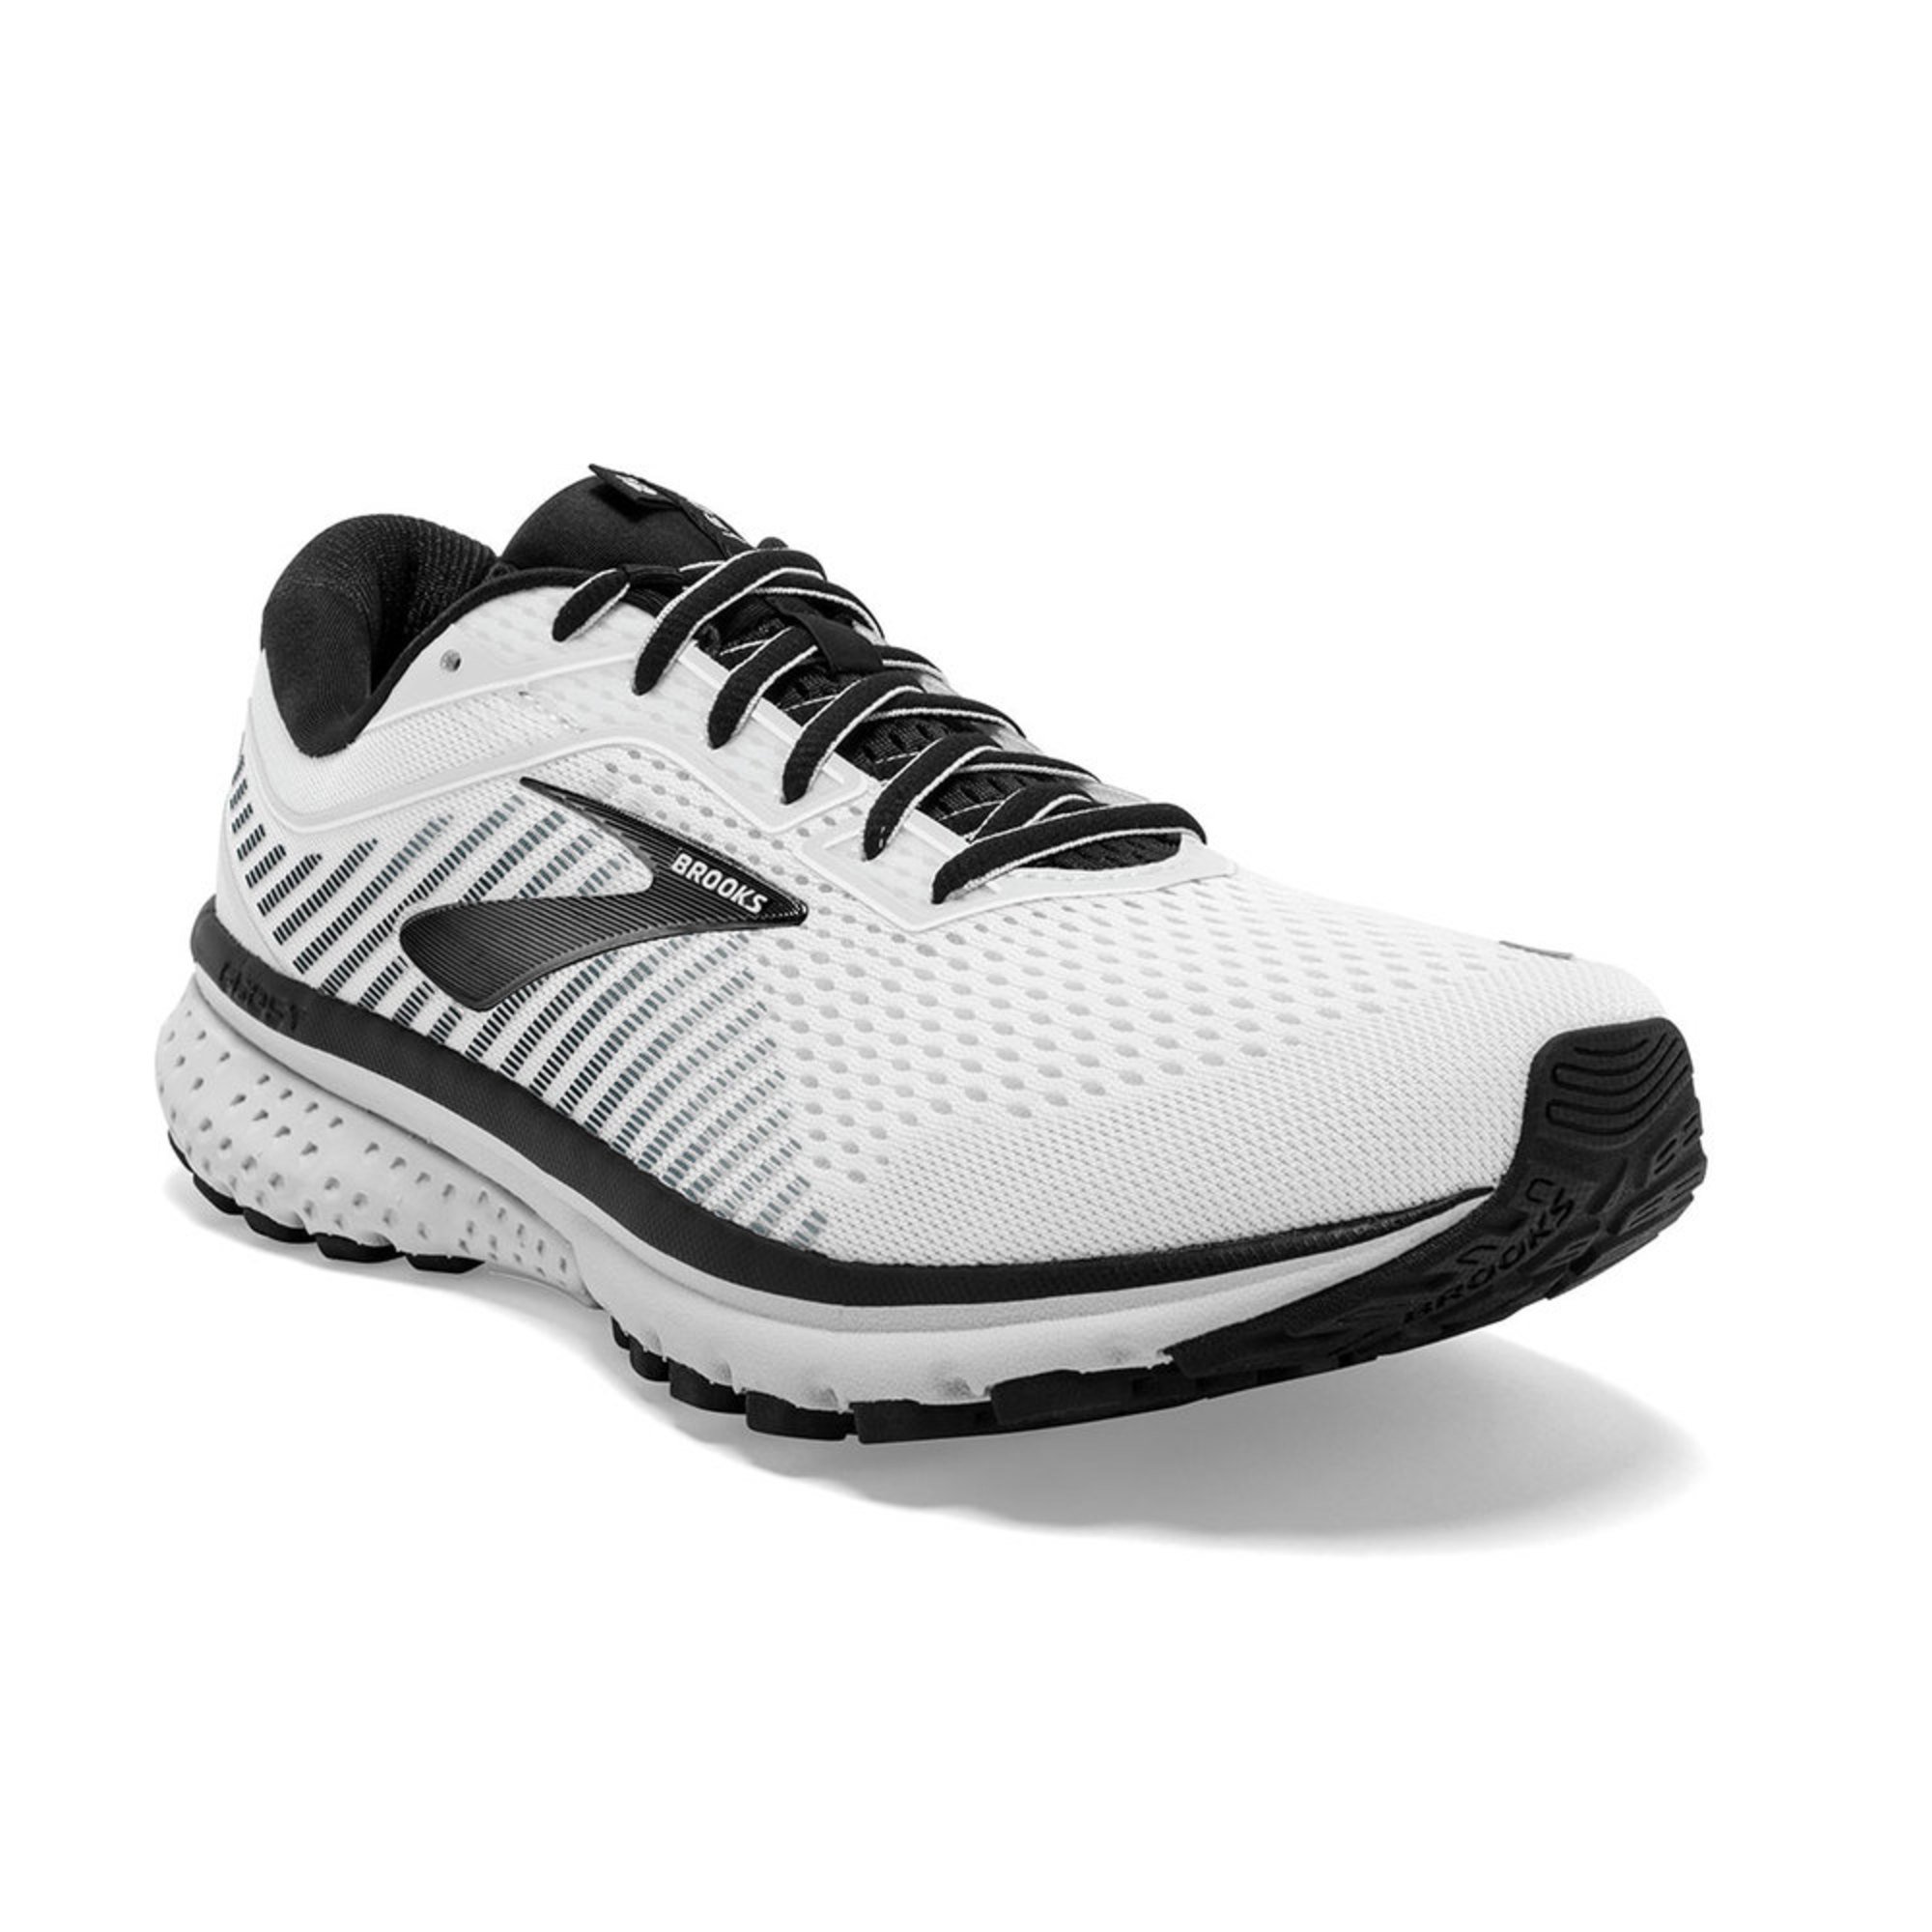 black and white brooks running shoes